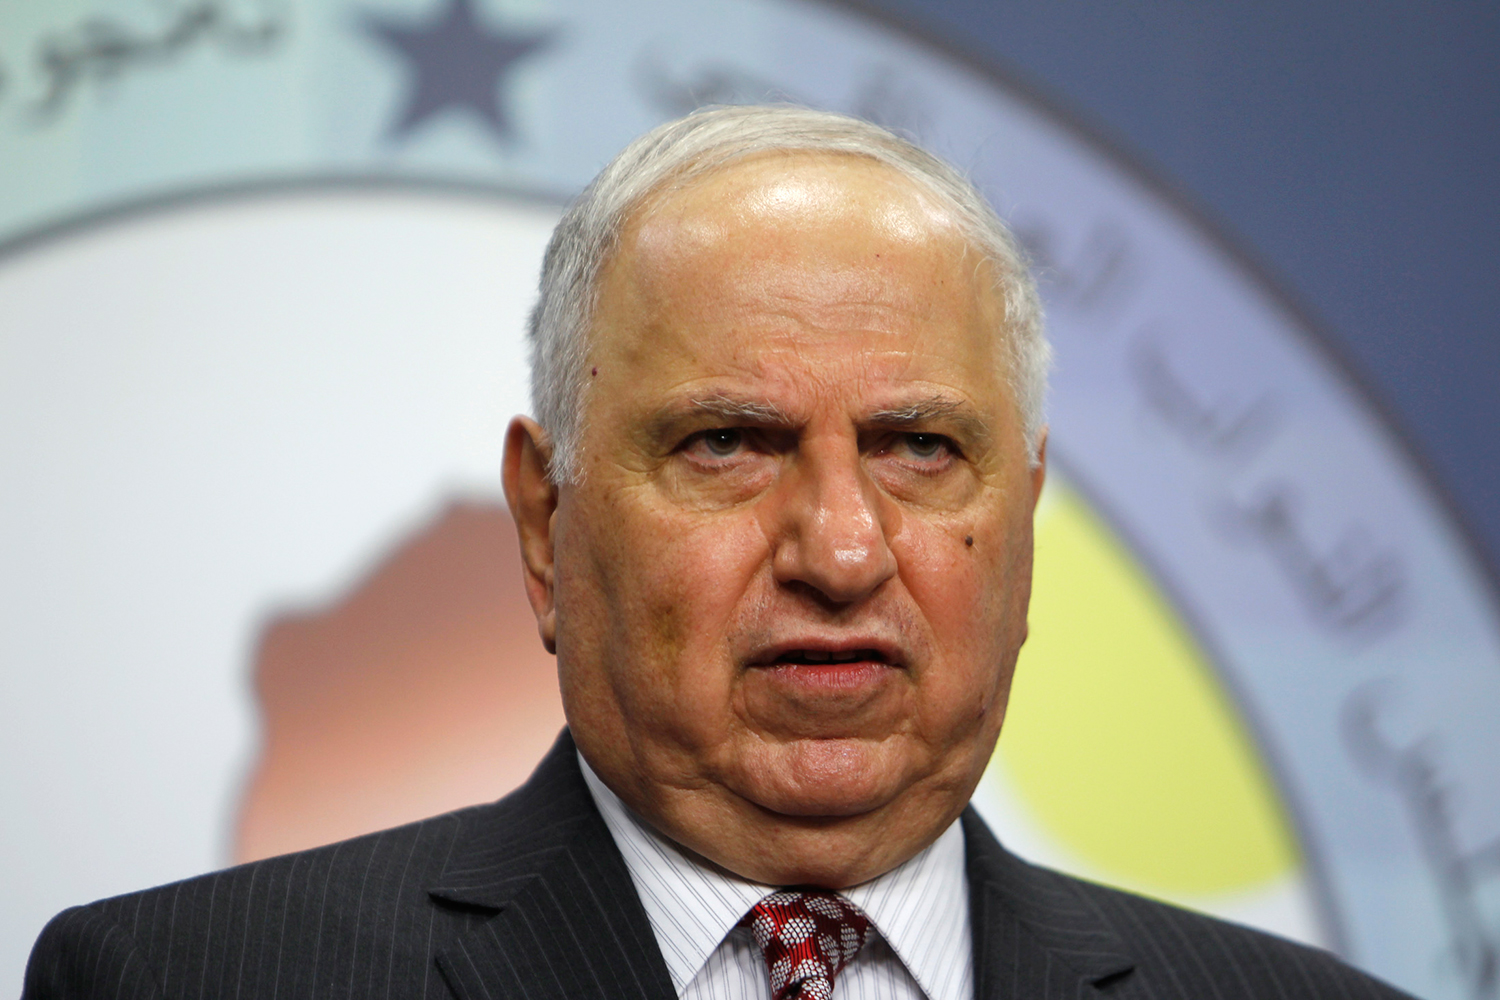 Iraqi politician that convinced the U.S. to invade his country in 2003 dies